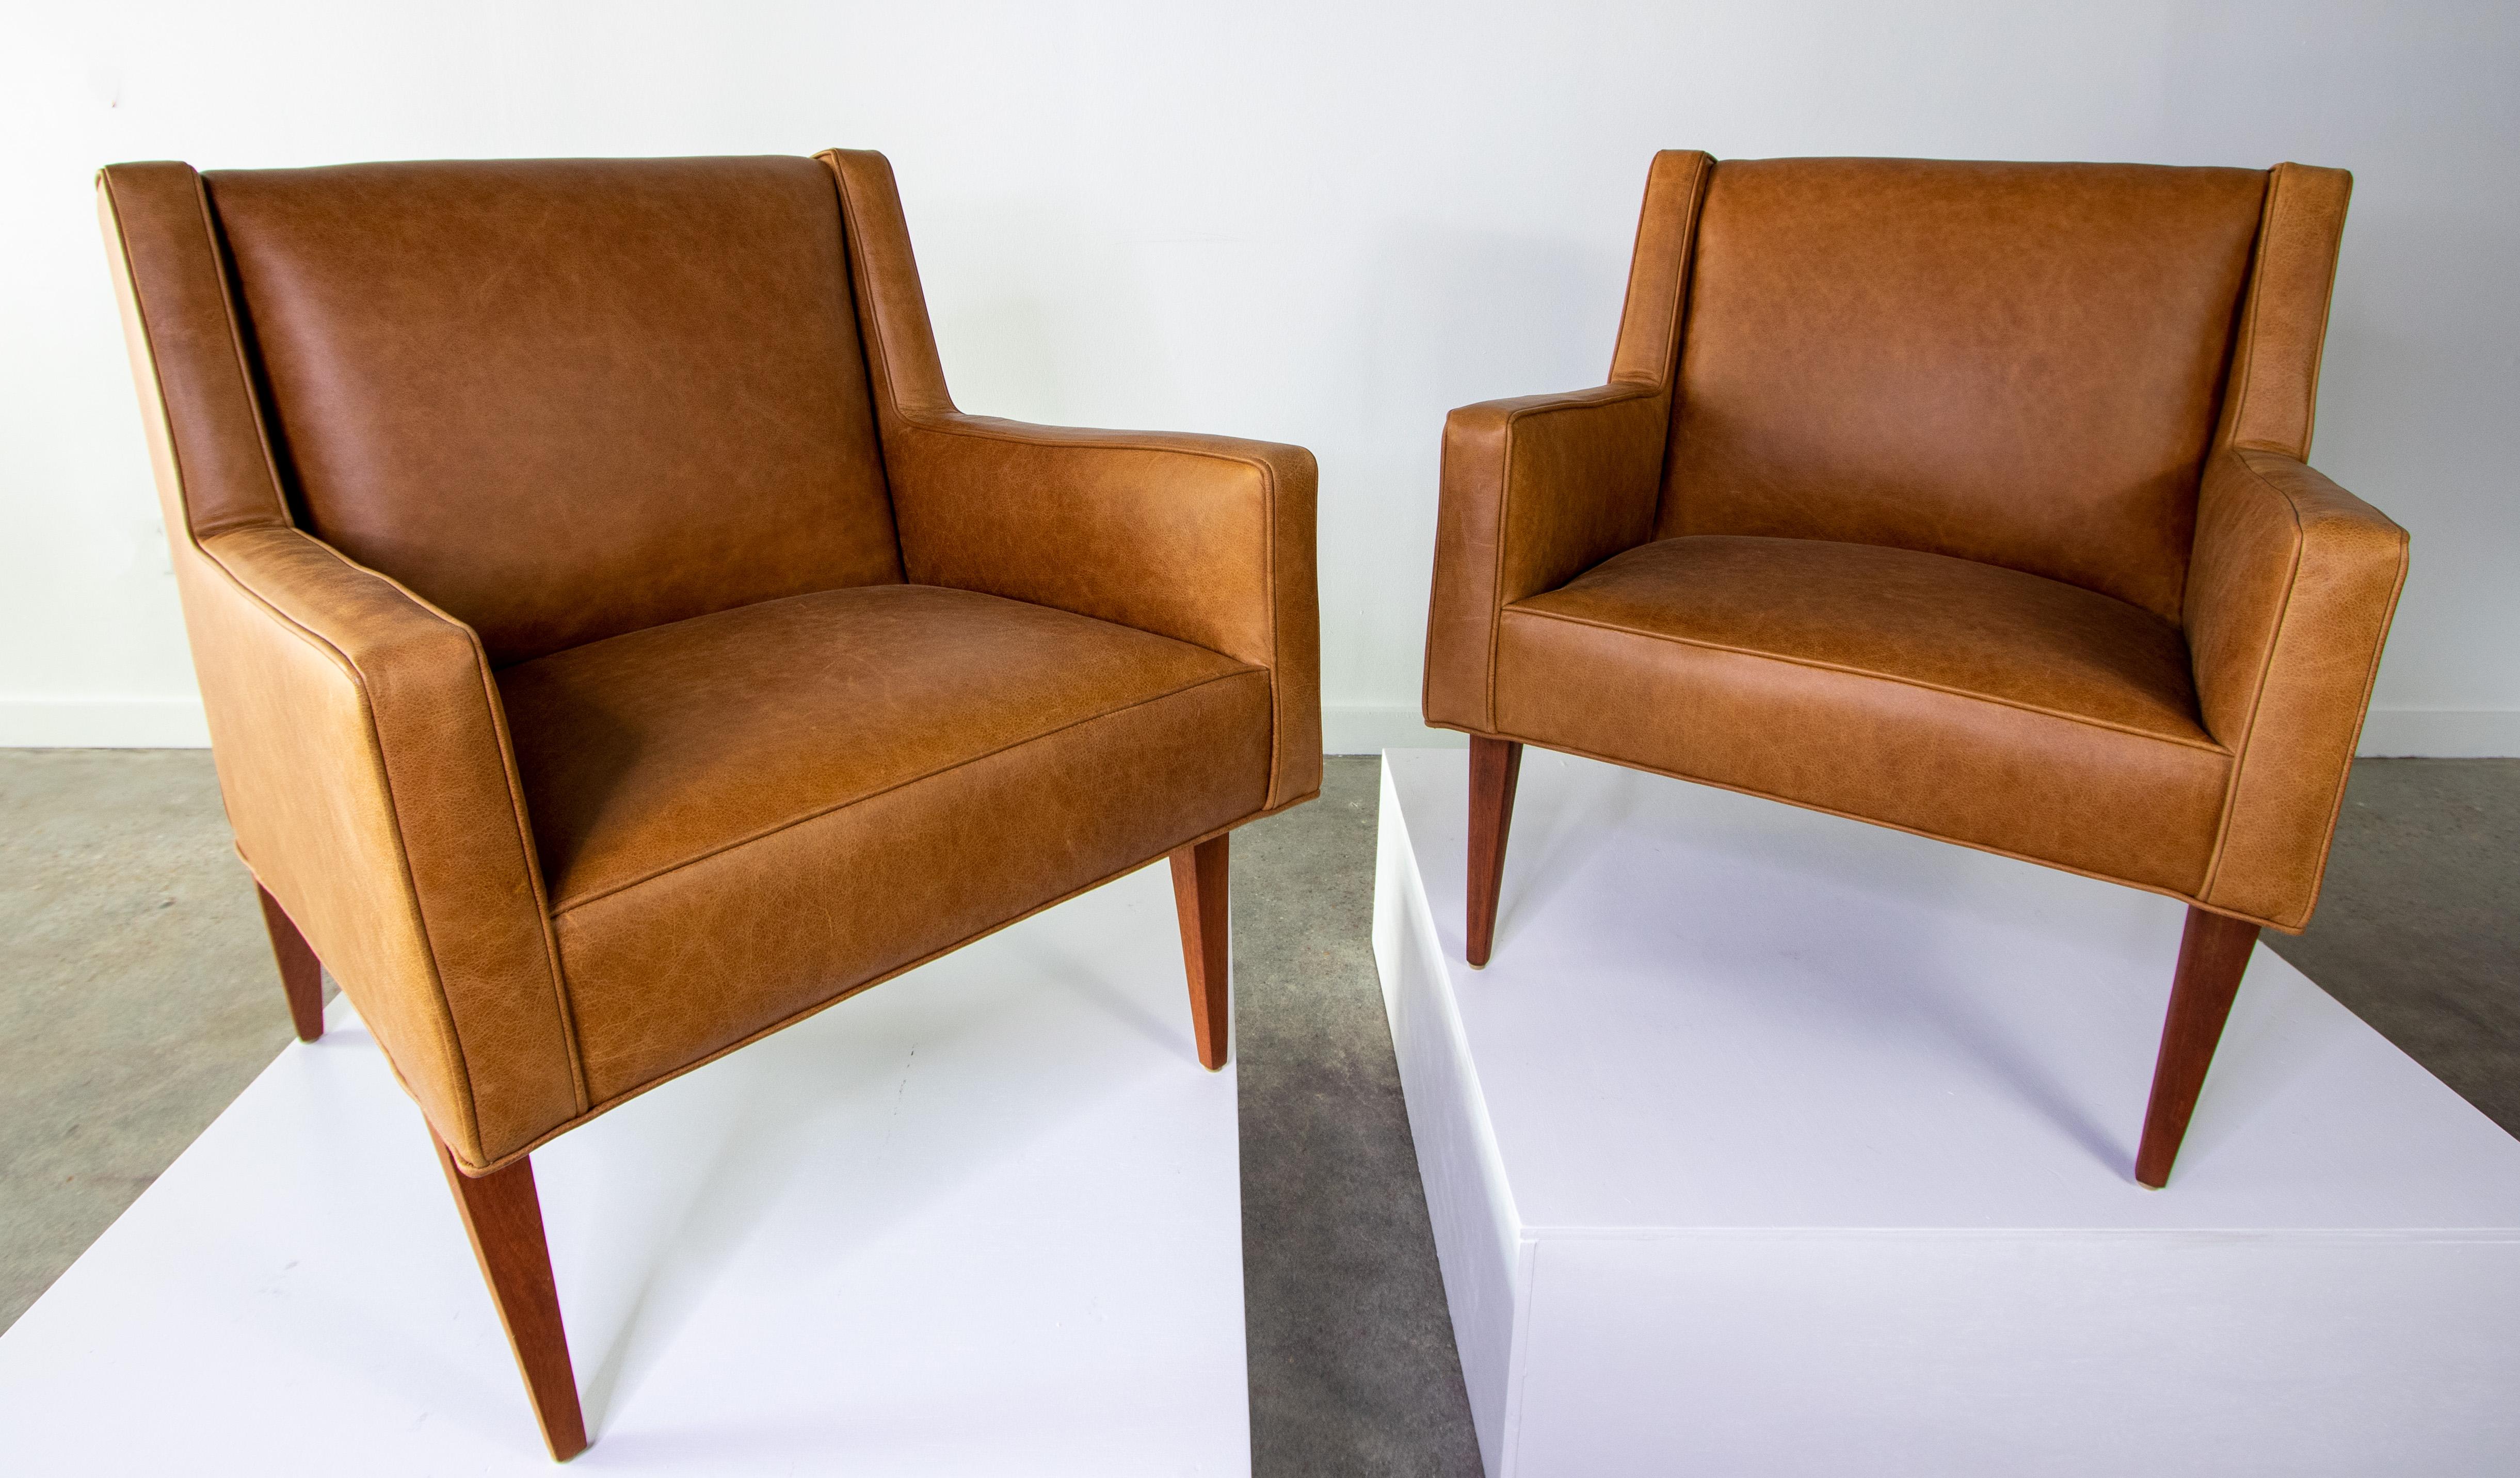 Leather 1950s Edward Wormley for Dunbar pair of leather lounge chairs no. 603 Mrs. Chair For Sale